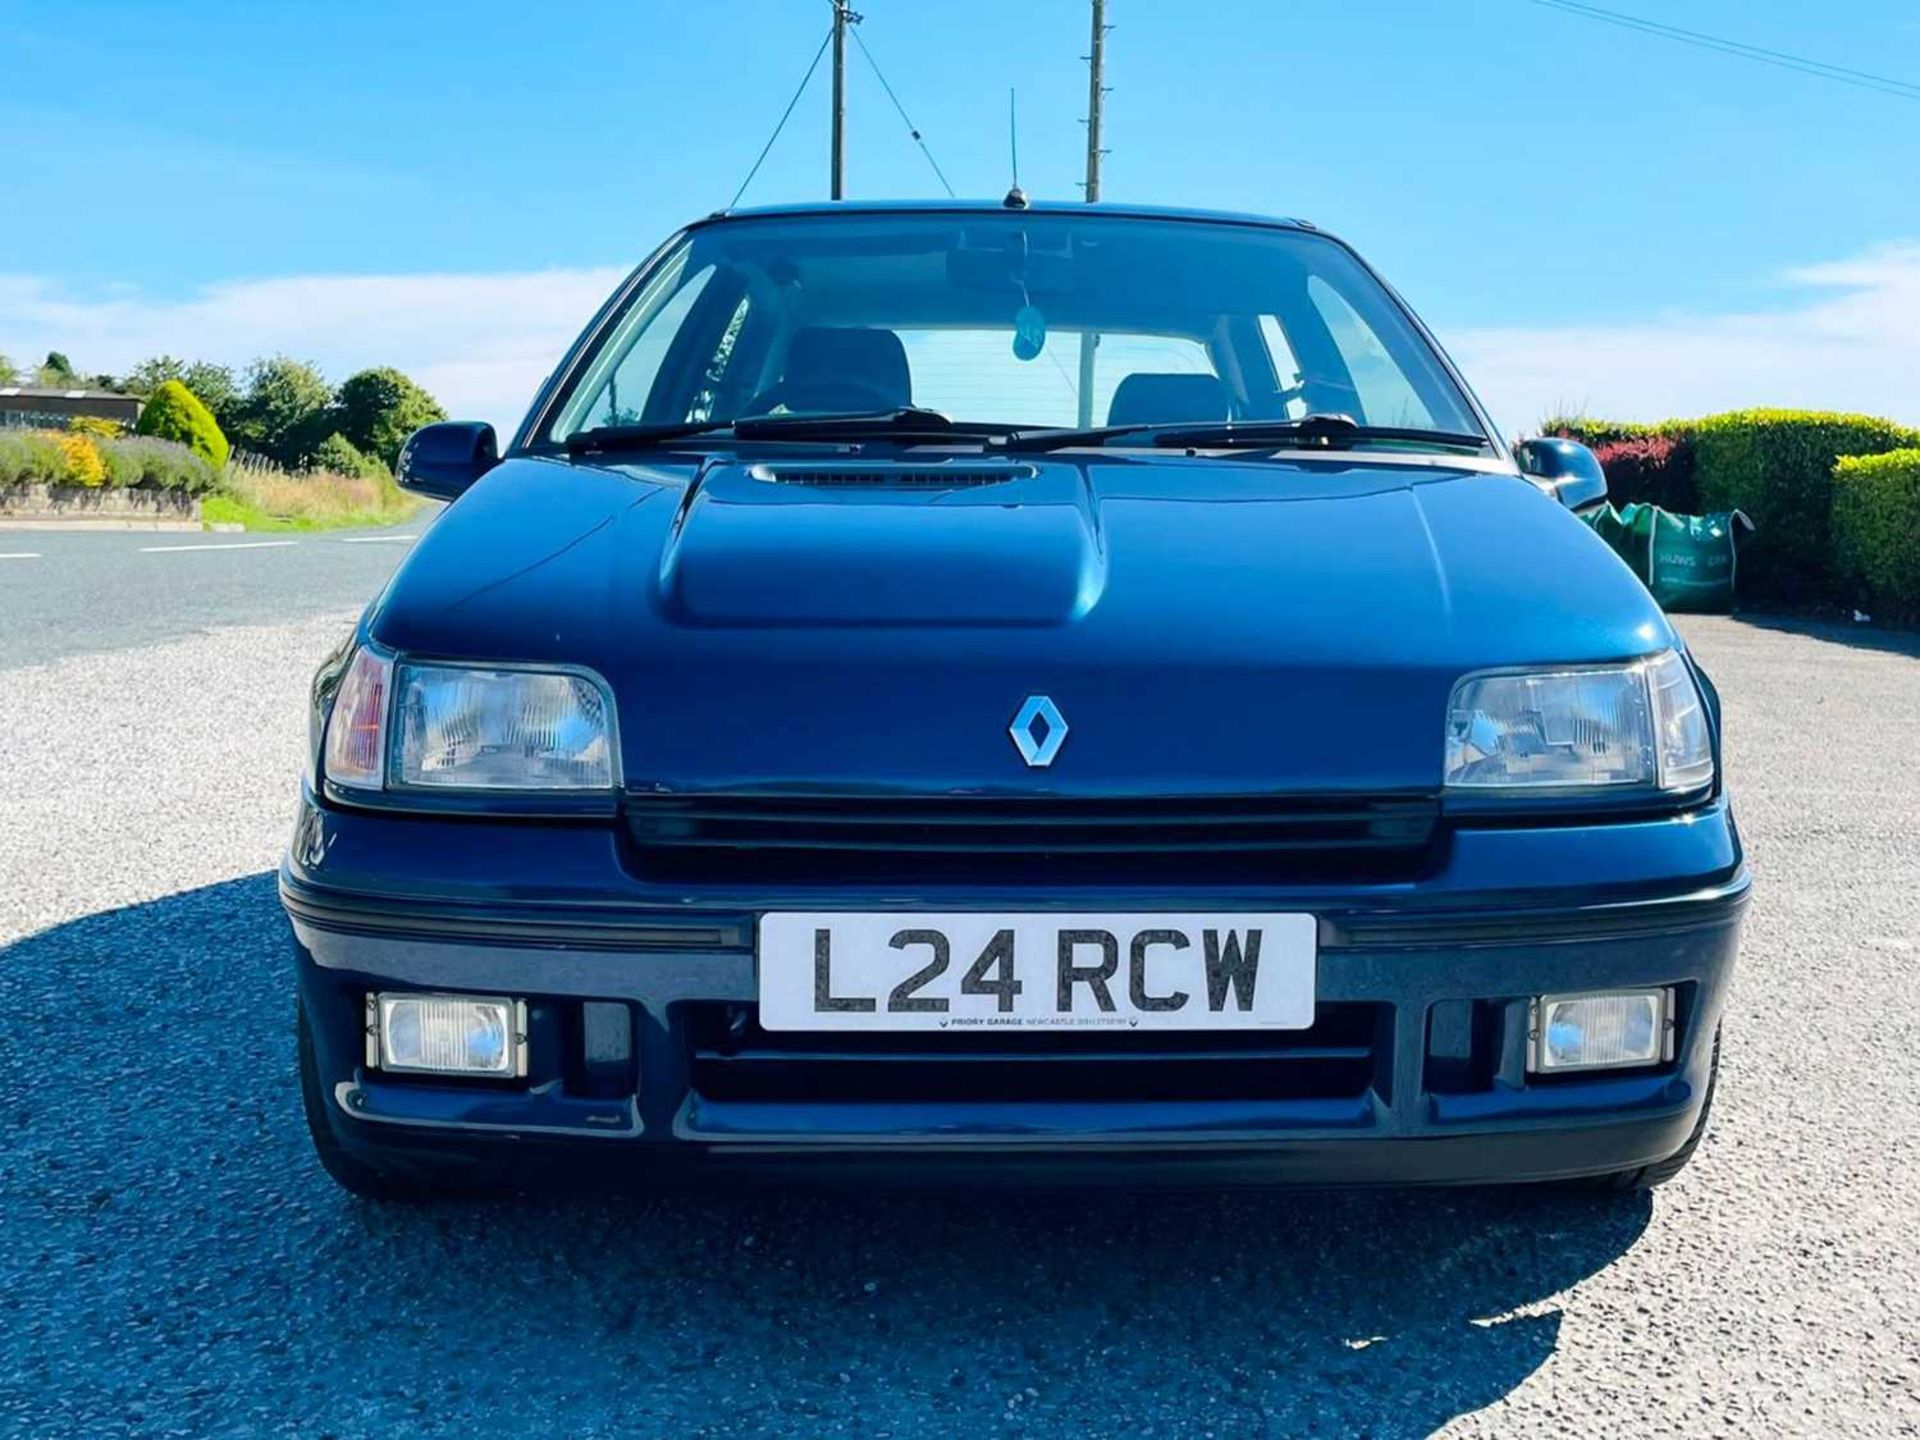 1994 Renault Clio Williams UK-delivered, first series model and said to be one of just 390 produced - Image 11 of 44